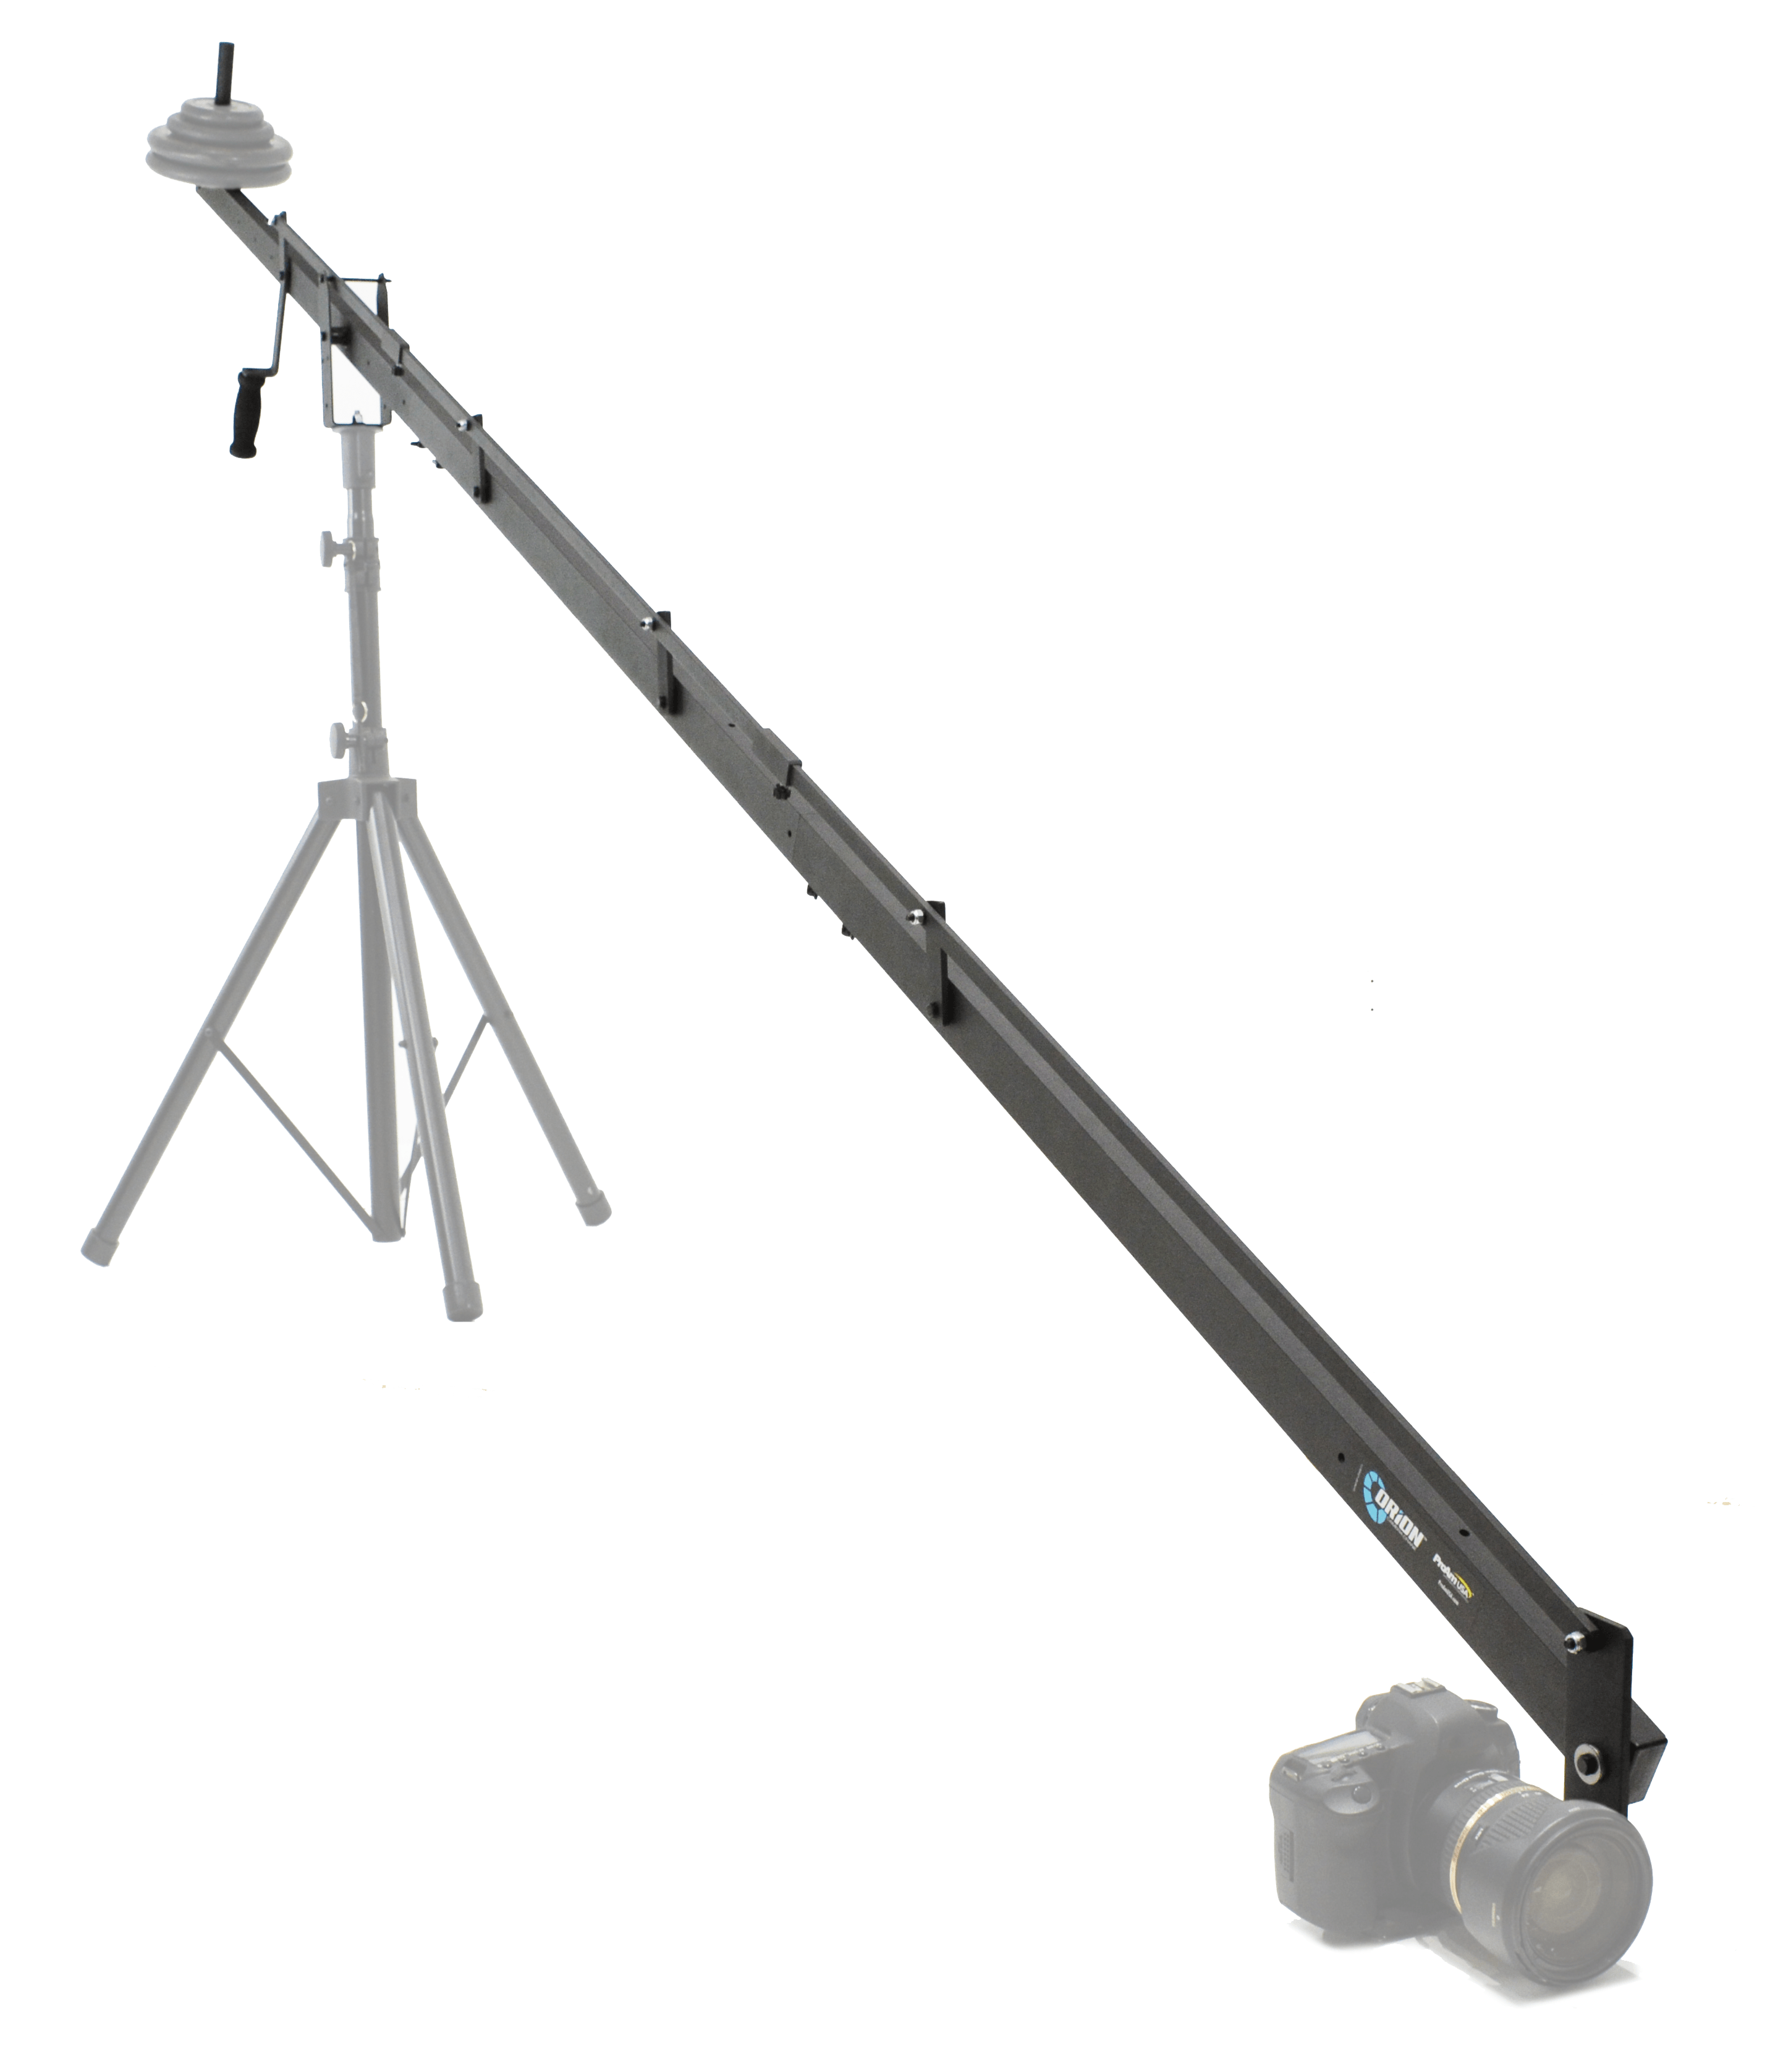 Orion DVC200 Camera Jib Crane with 4 ft Extension (12 ft Total Length)